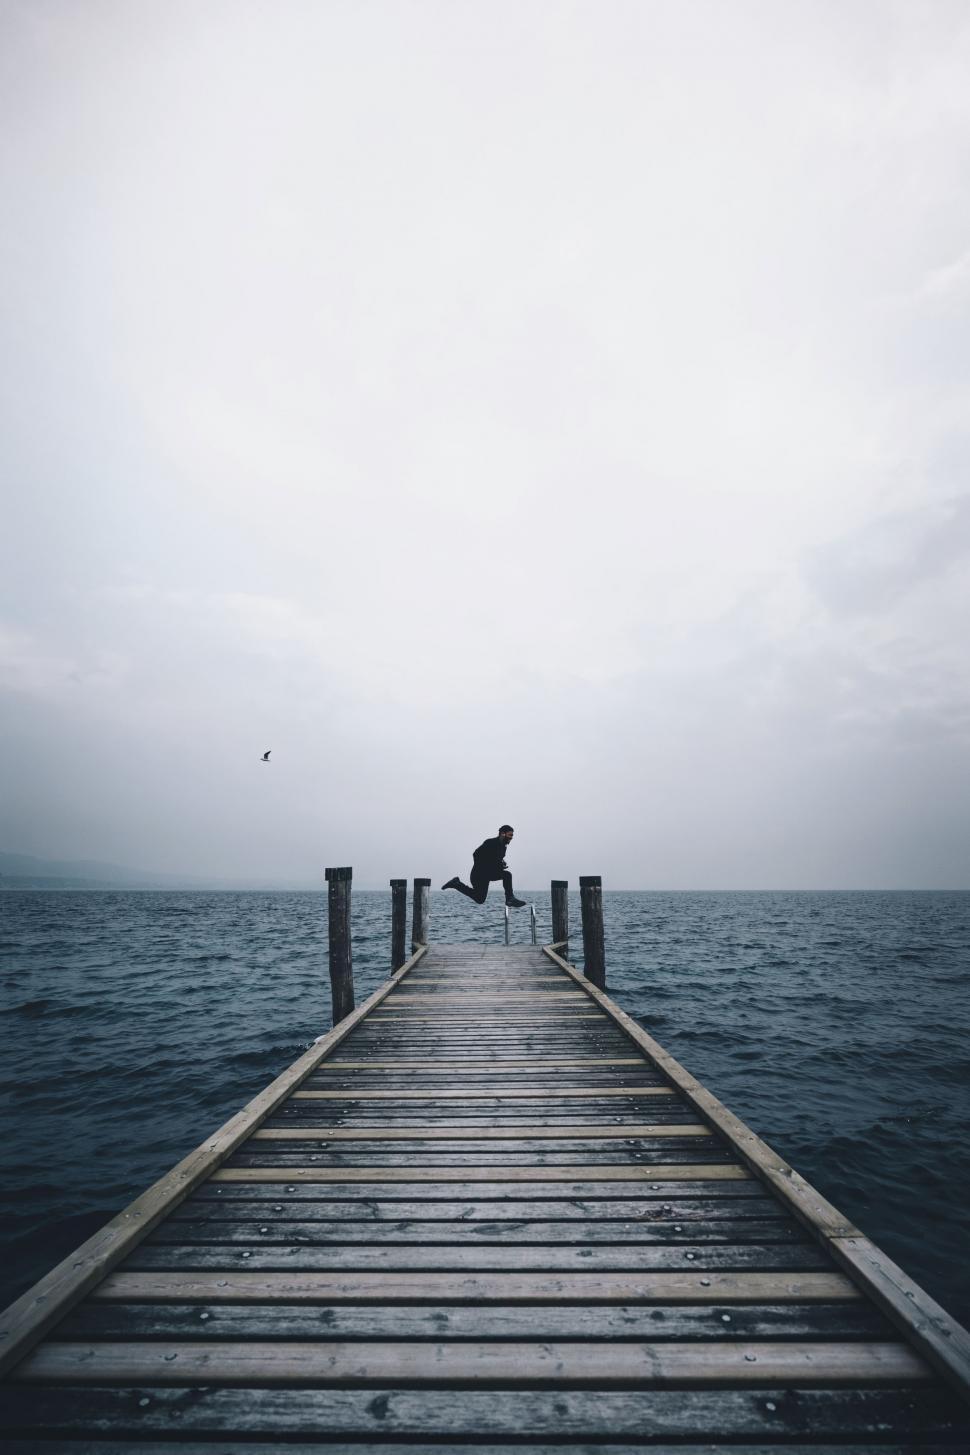 Free Image of Person Sitting on Dock in Middle of Ocean 